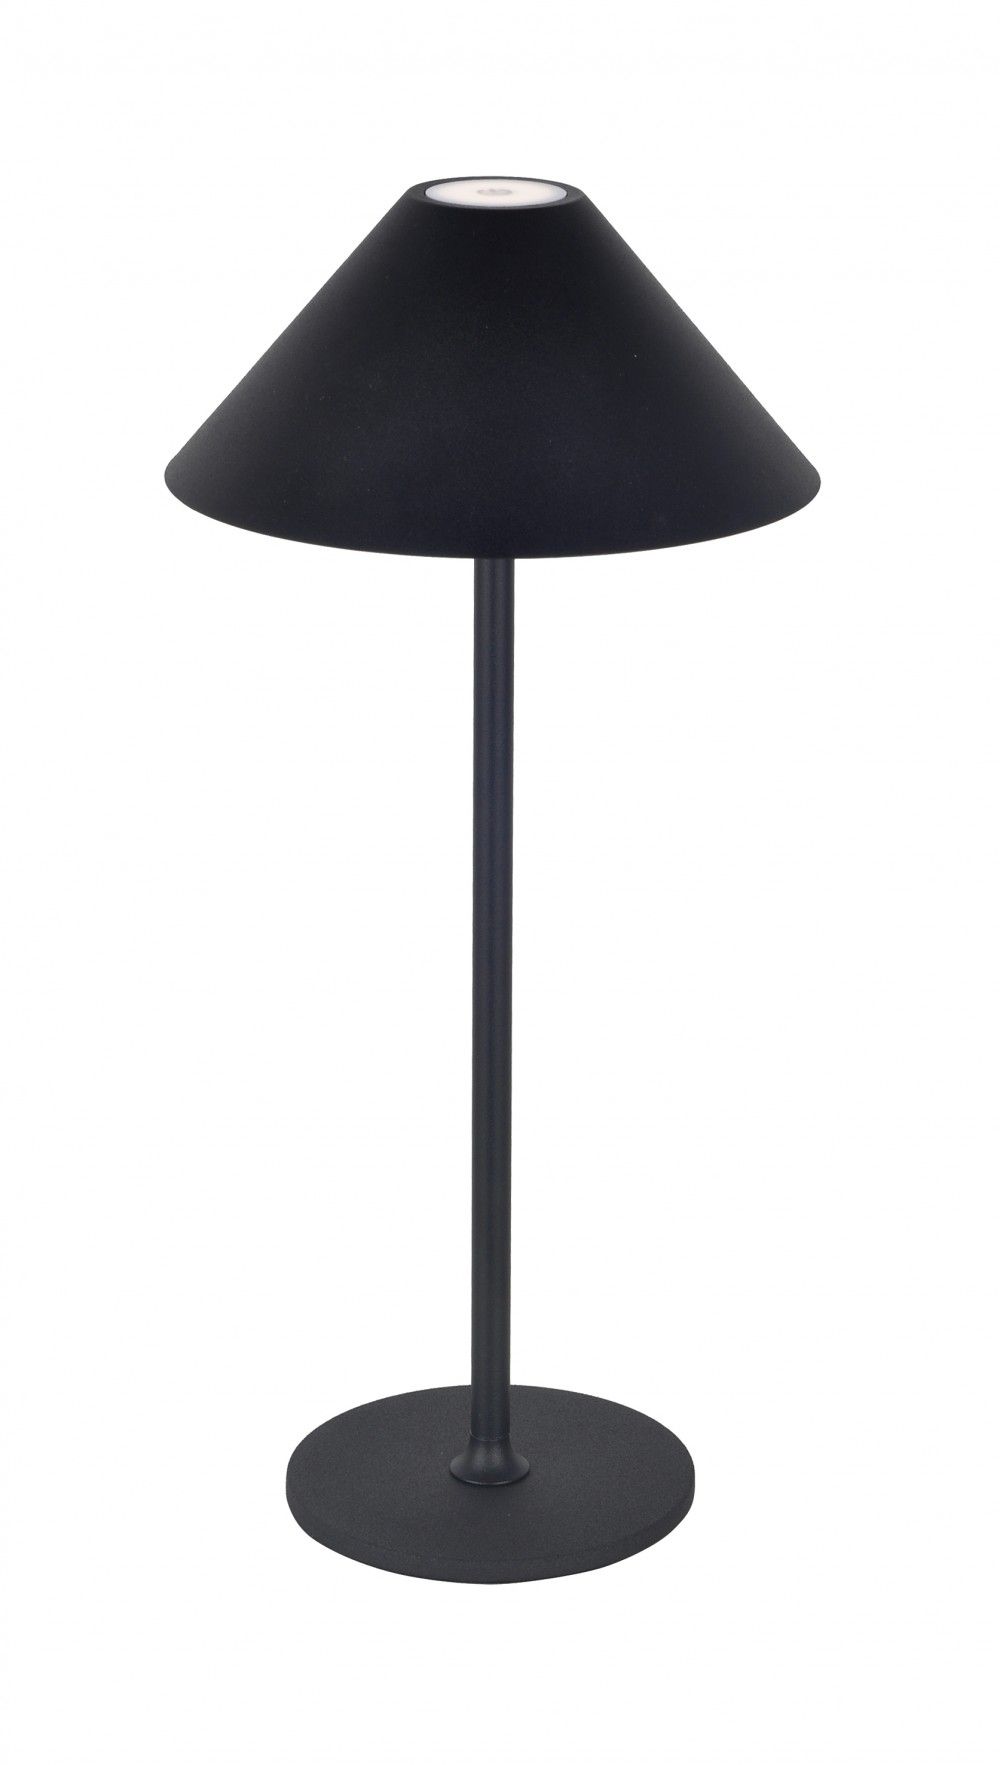 VIOKEF Table Light Black with Battery Supply Cone - VIO-42...